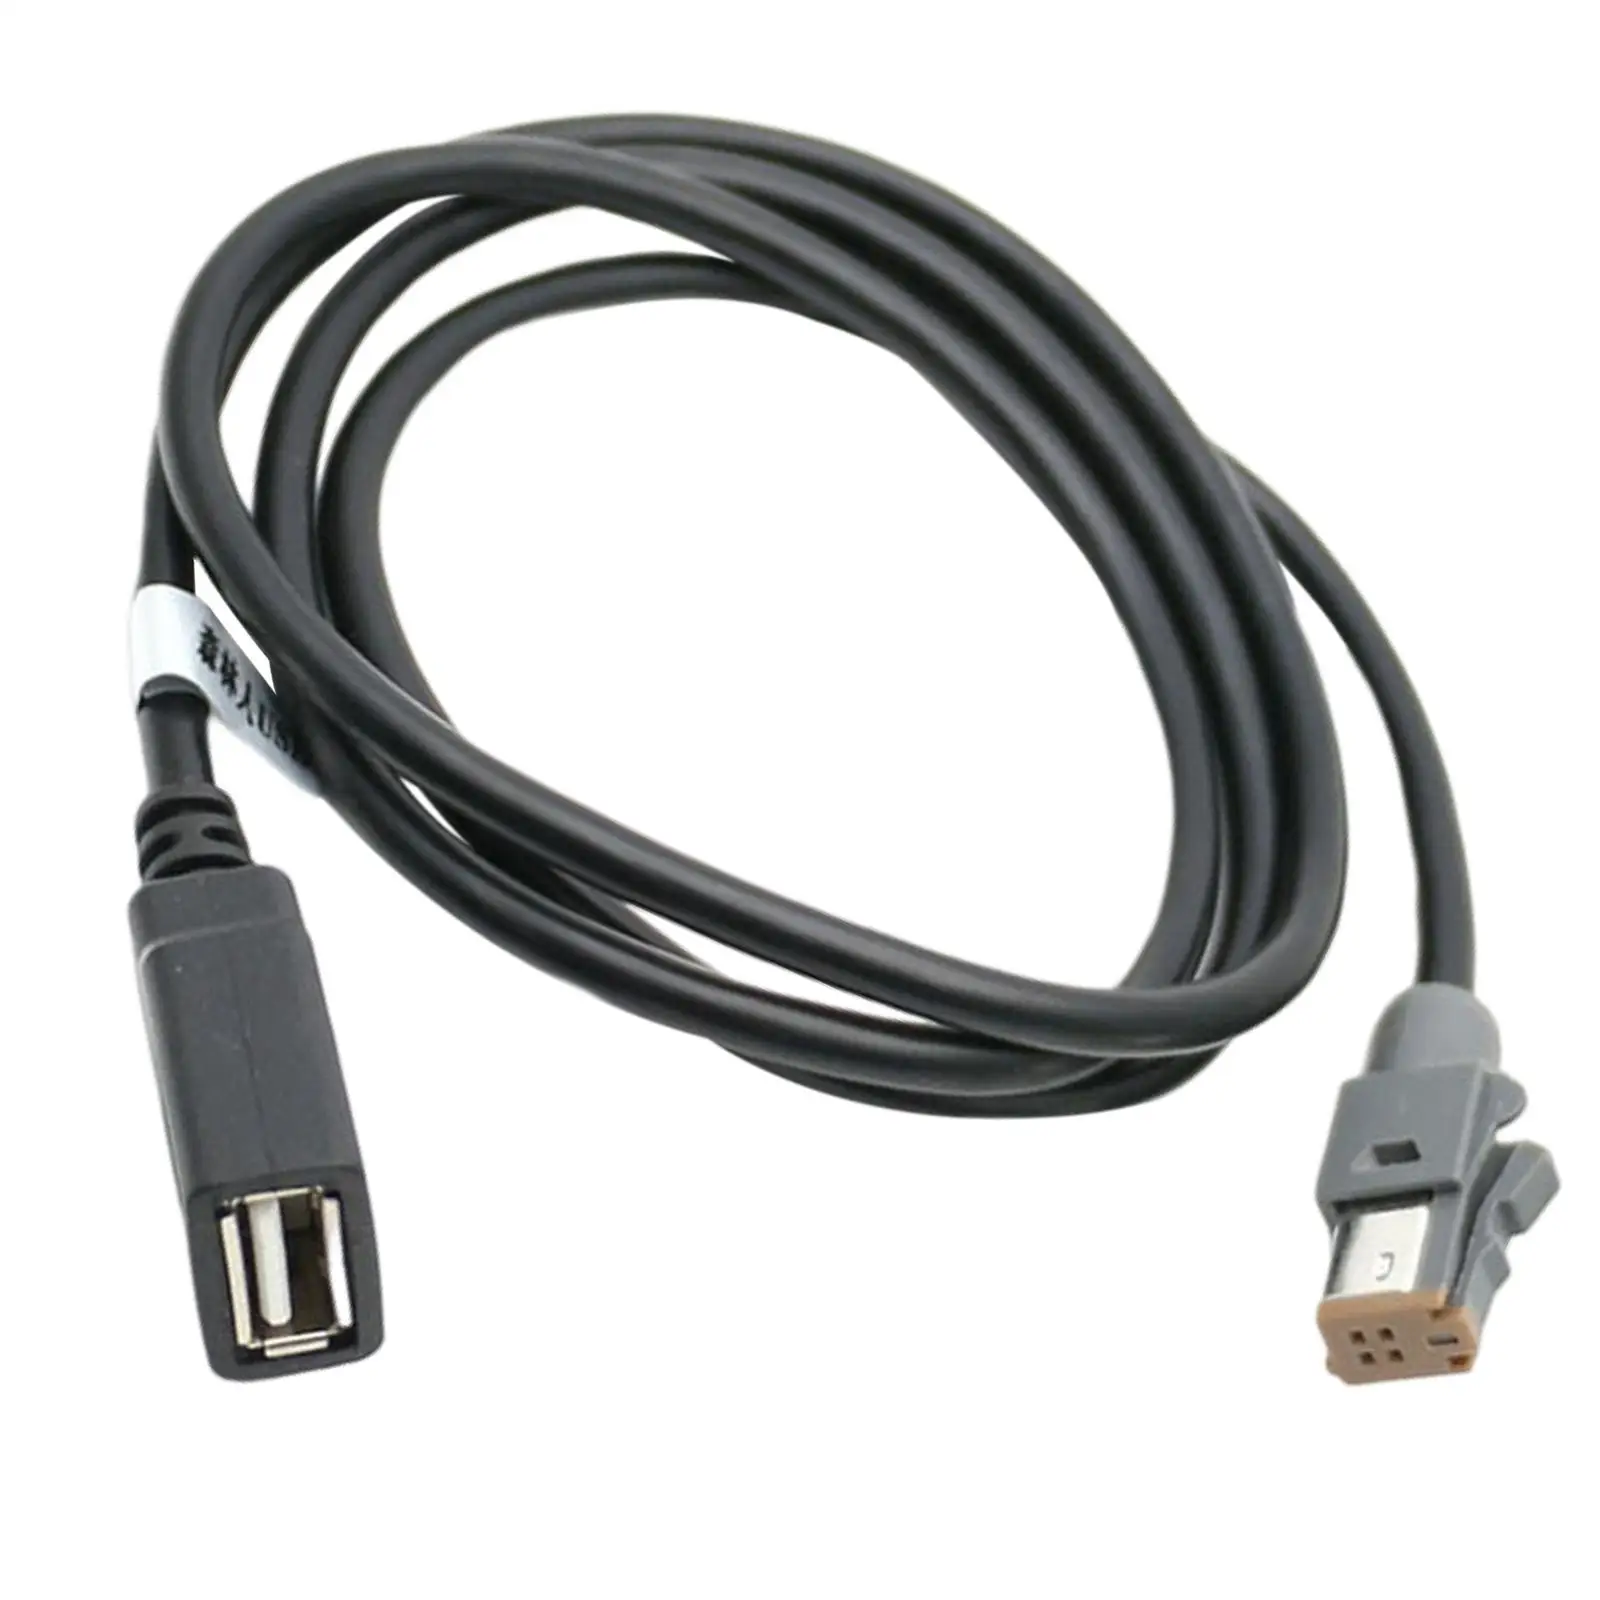 Car Converter Adapter Cable Cord Connector for Suzuki 2014 Onwards